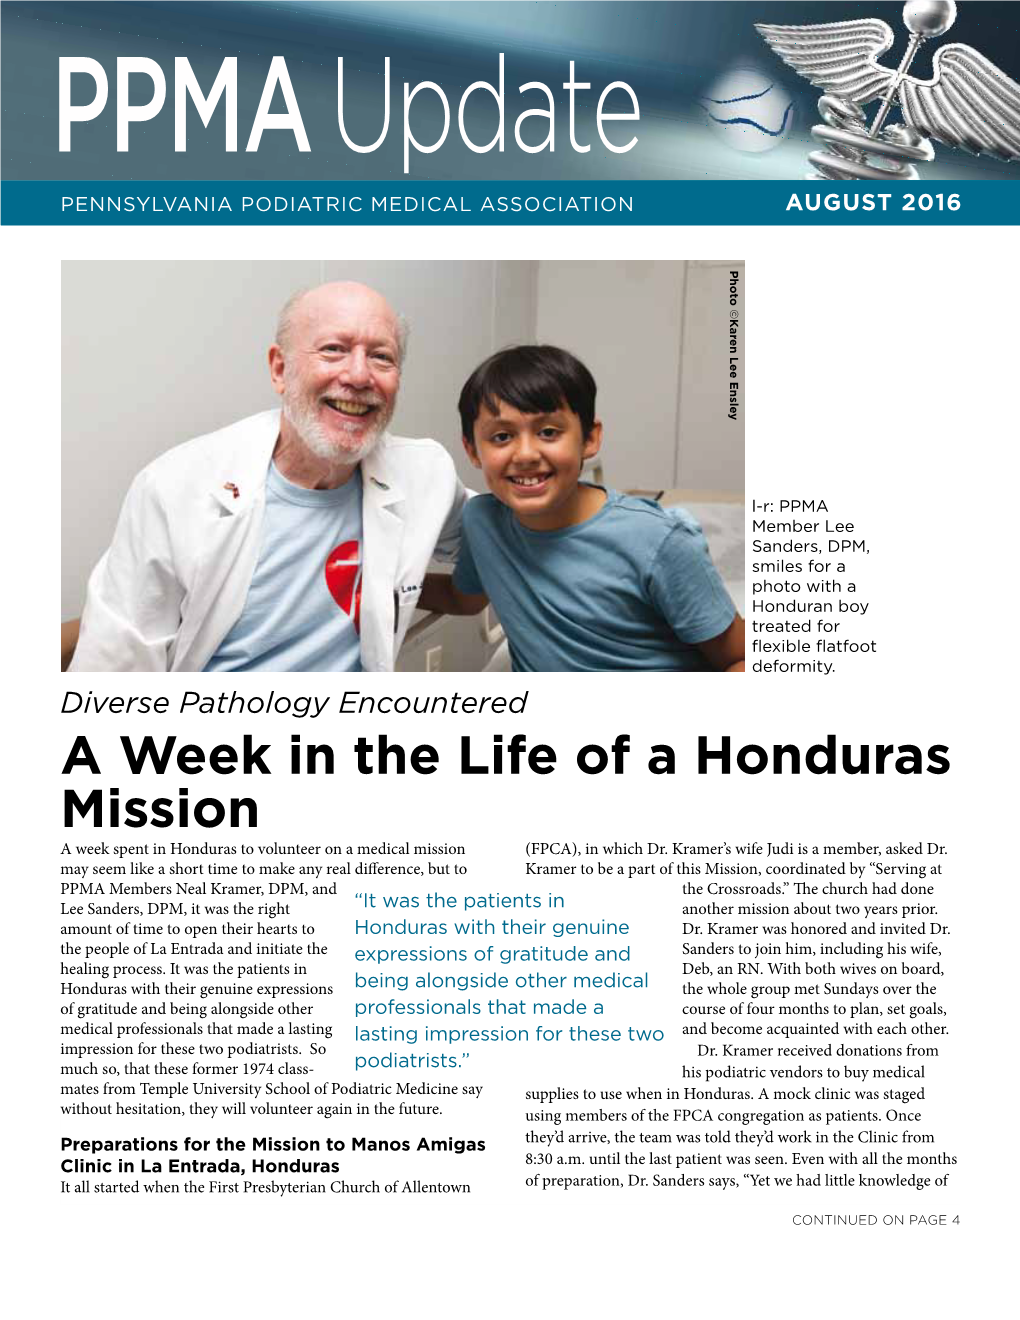 A Week in the Life of a Honduras Mission a Week Spent in Honduras to Volunteer on a Medical Mission (FPCA), in Which Dr